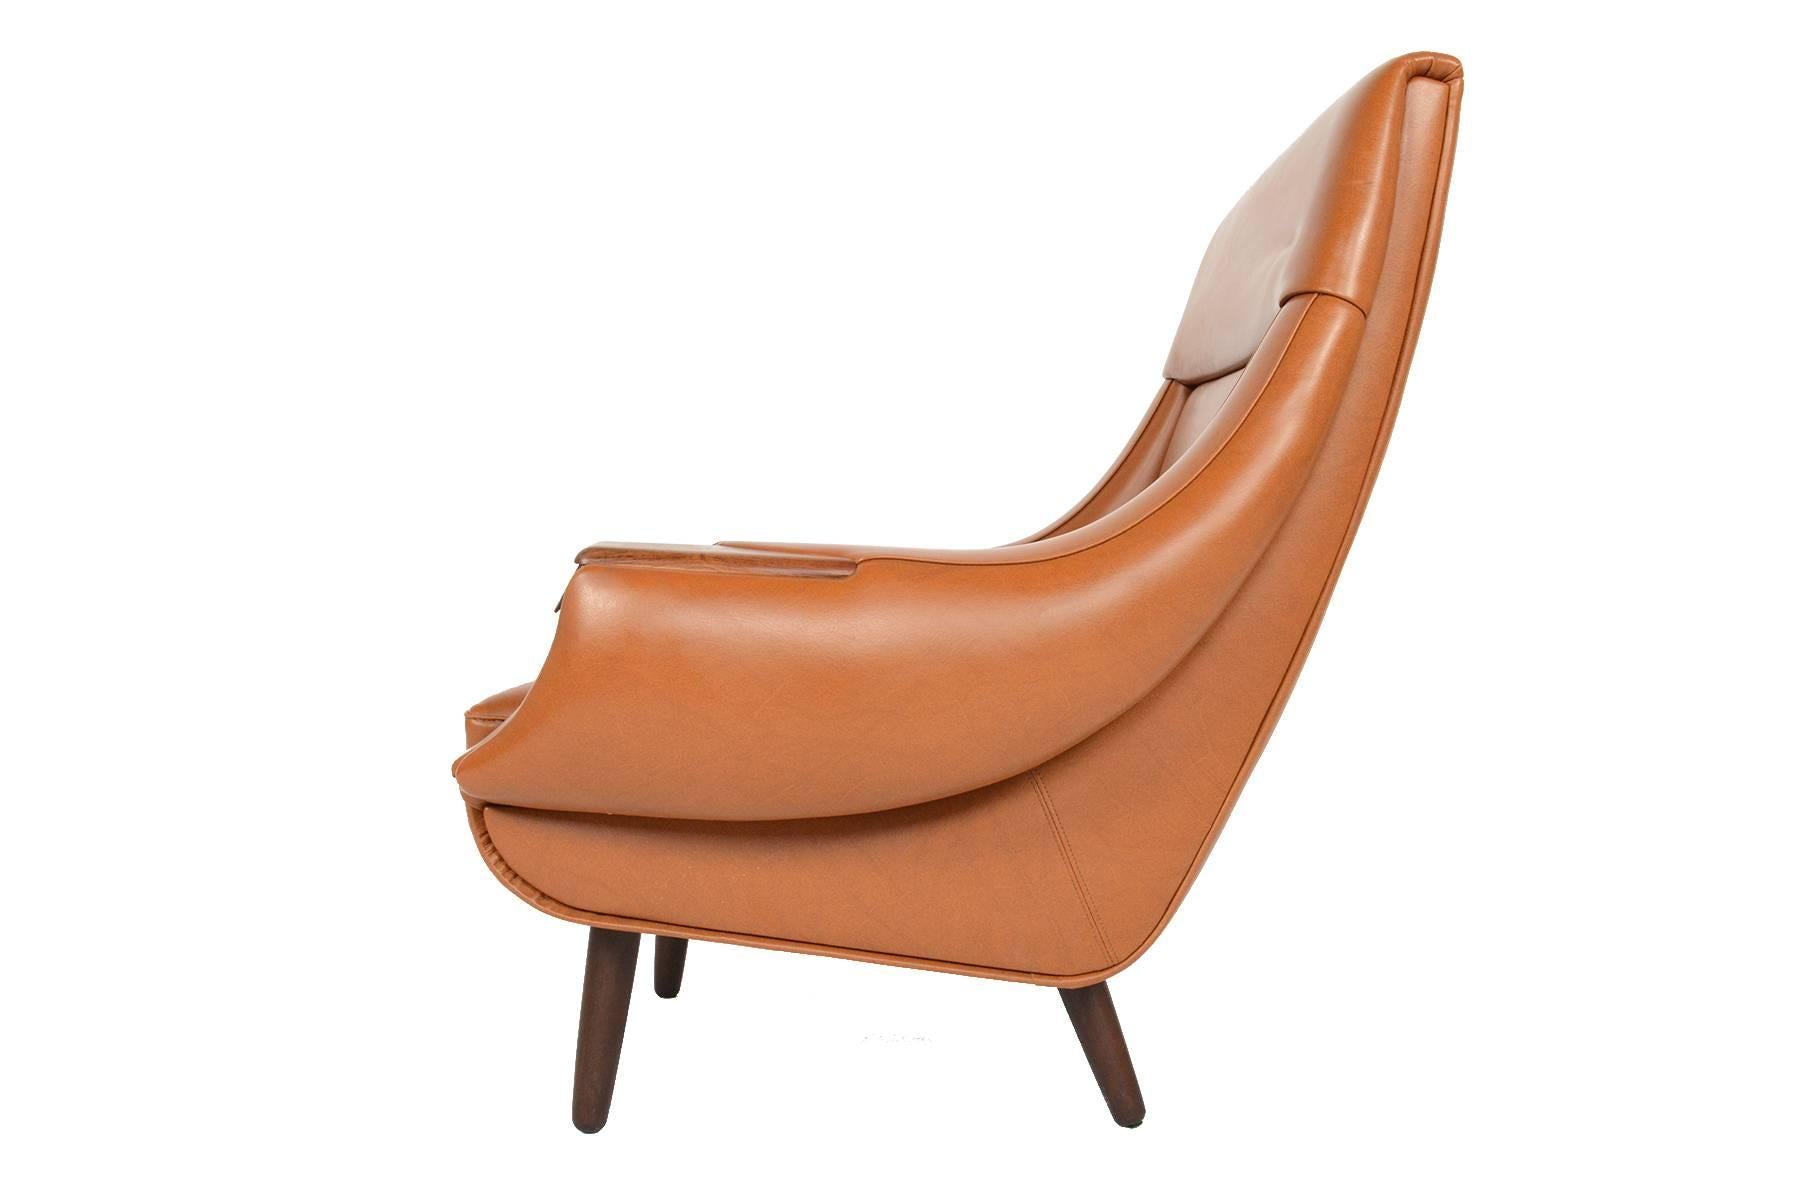 Late 1960s Scandinavian design is on full display with this gorgeous highback lounge chair designed by H.W. Klein for Bramin. Cascading arms and a wide, contoured base give the feeling of movement to this design. Two carved rosewood pulls sit on the